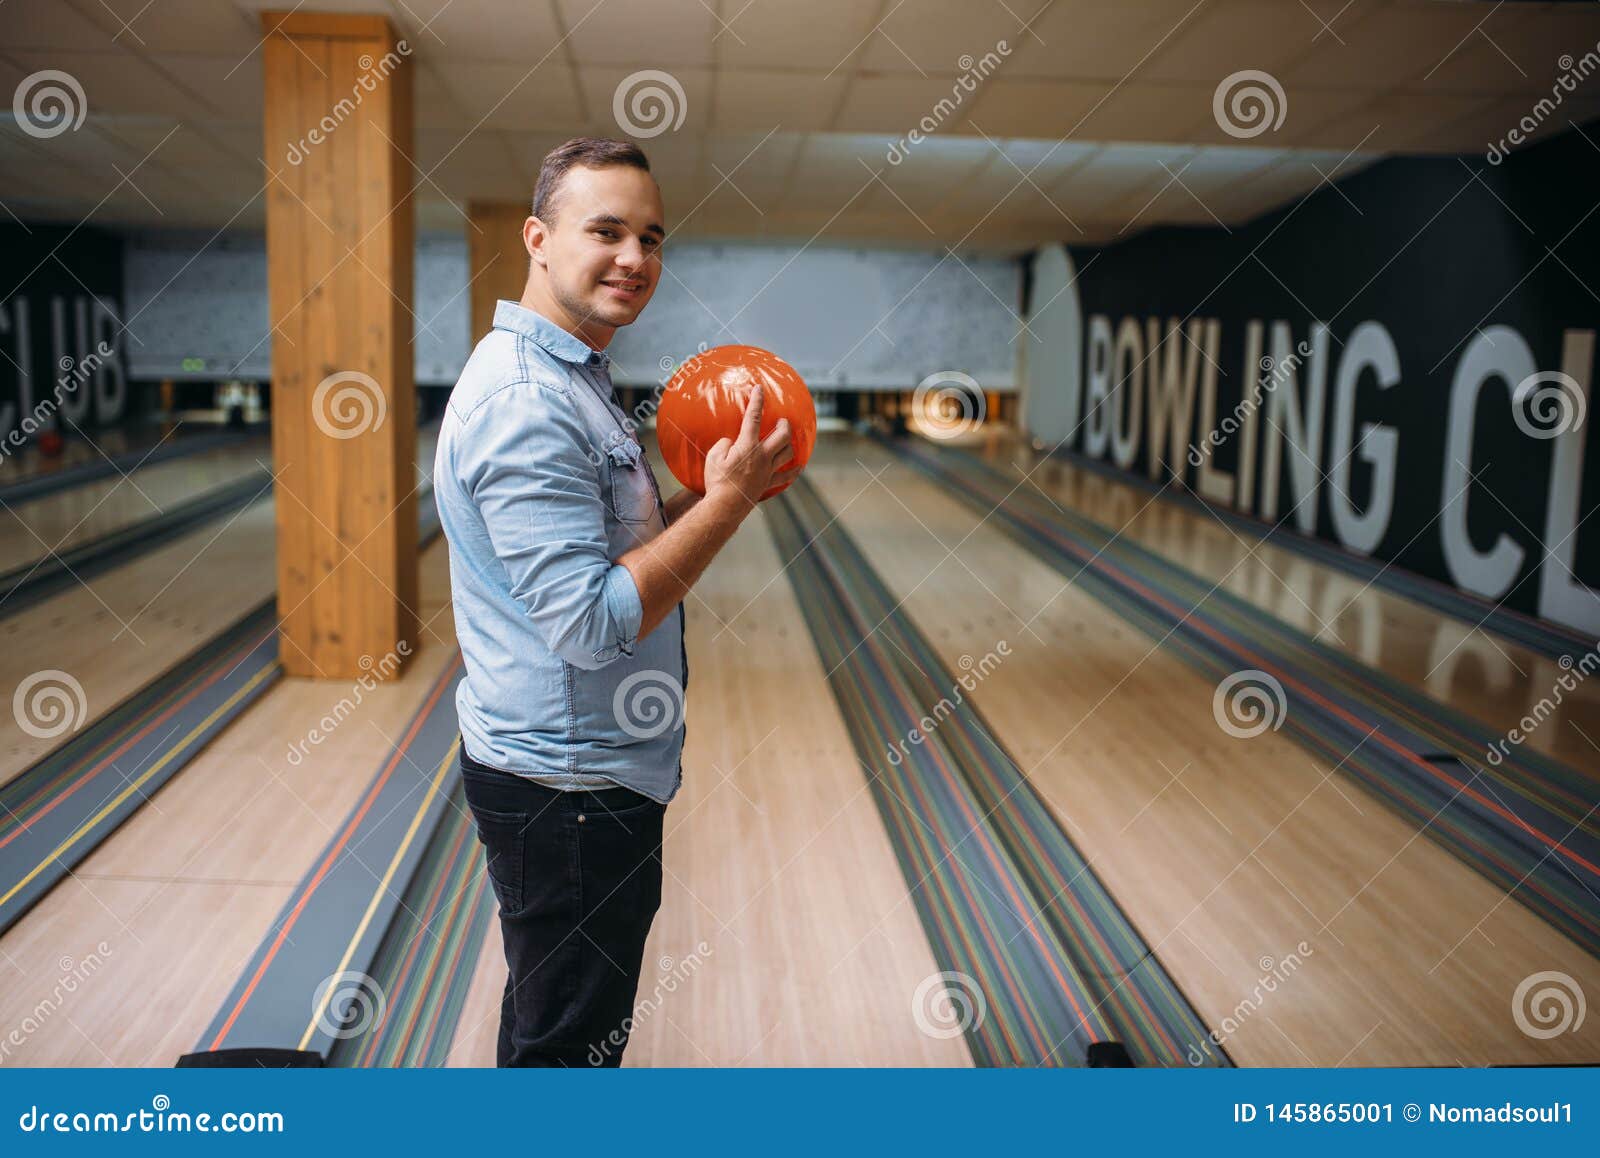 Bowling ball and house shoes on lane in club Stock Photo by NomadSoul1